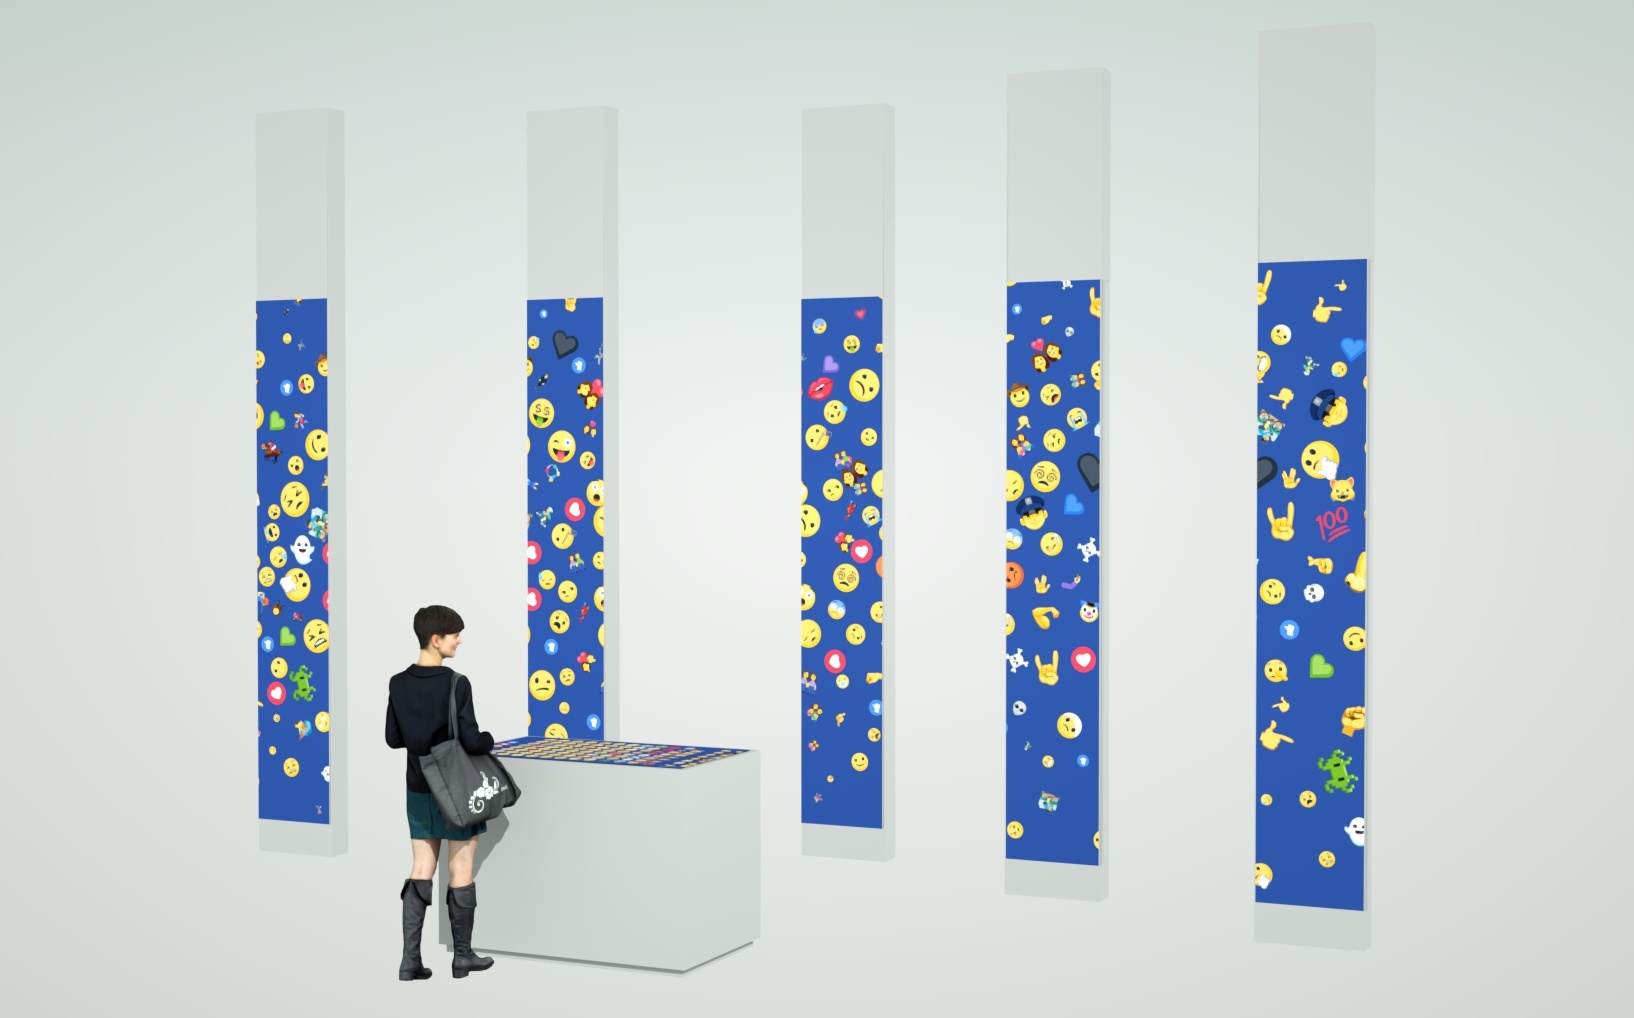 Render of 5 pillars with screens that show blue background with streams of random emojis, responding to an interactive touchpad that is being interacted with by a person